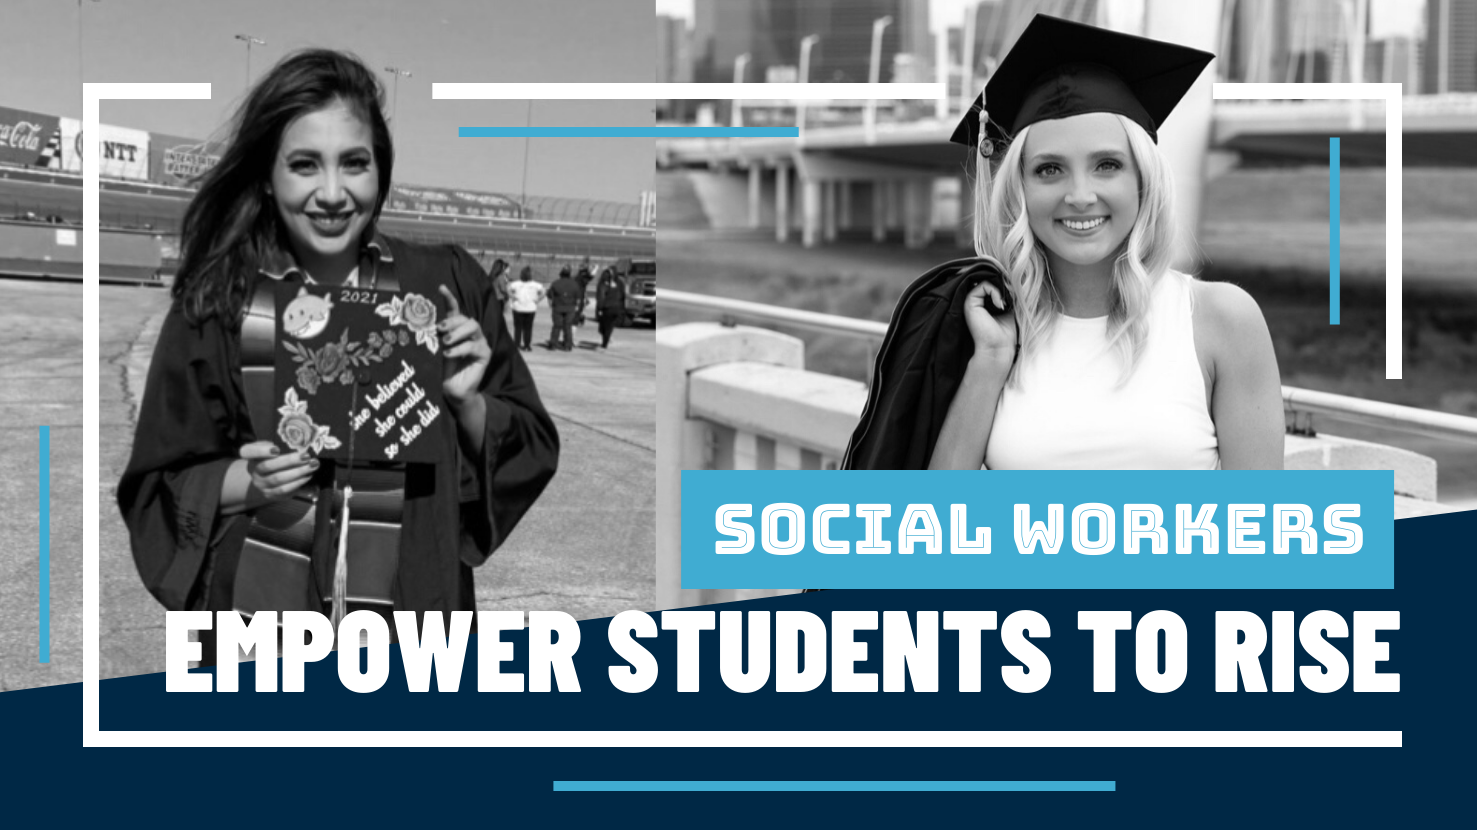  Social Workers Empower Students to RISE